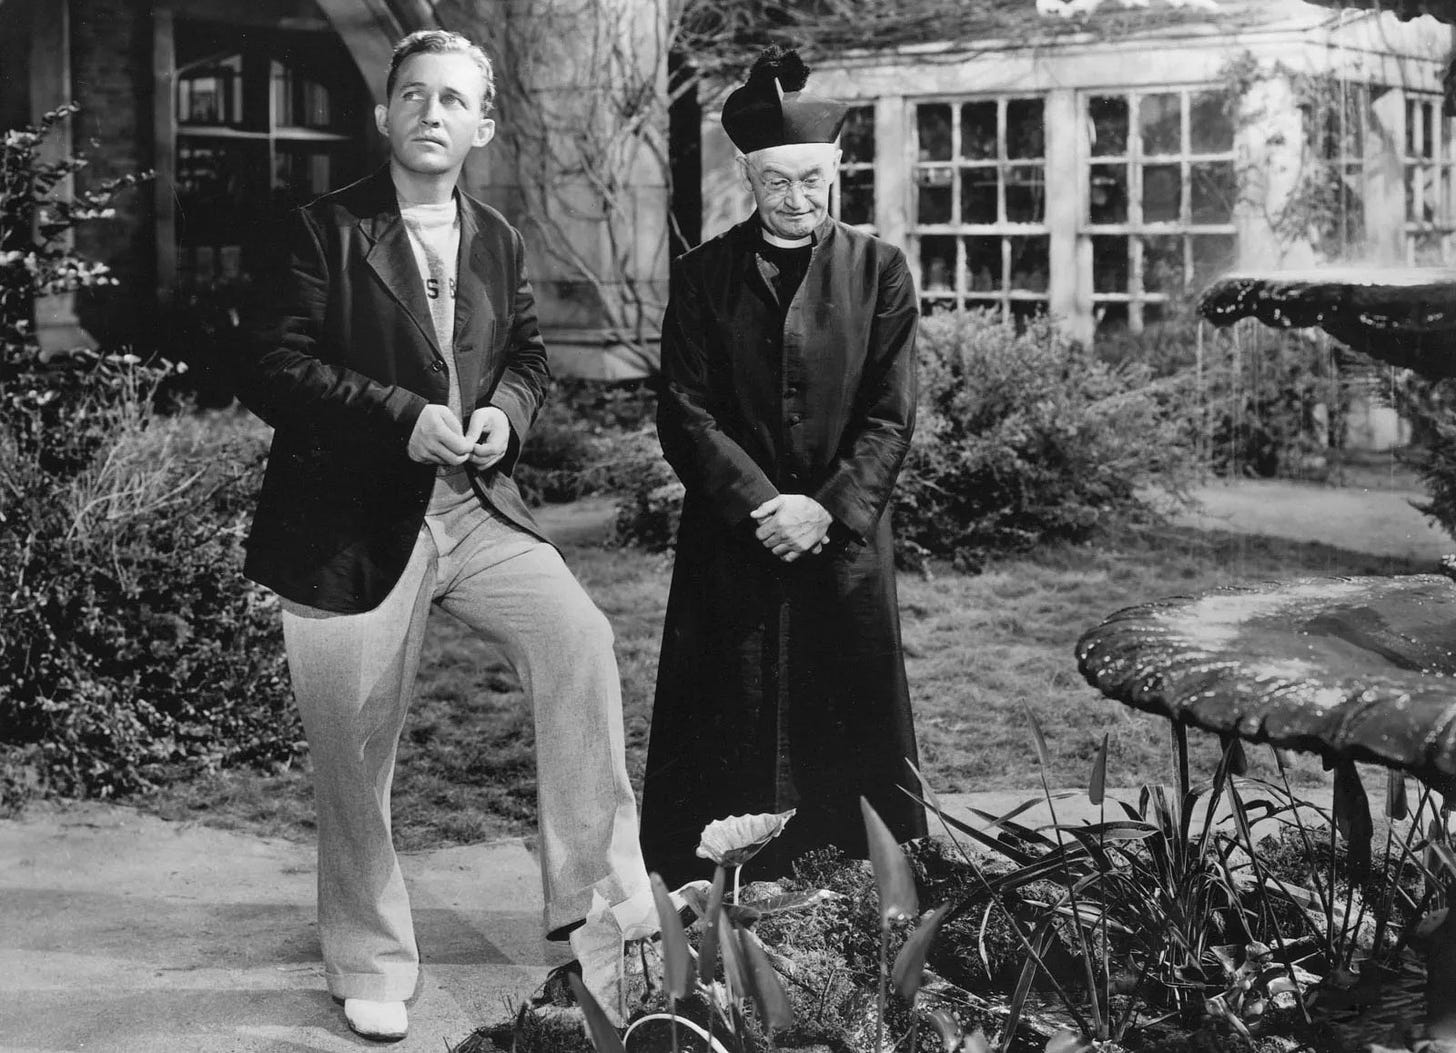 Bing Crosby (left) in casual wear and Barry Fitzgerald in an old-fashioned Catholic Prisest’s surplice and cap in Going My Way (1944). They’re in the garden of the priest’s home. Corsby looks up and out of shot with a serious expression. Fitzgerald look down at a flower bed contemplatively